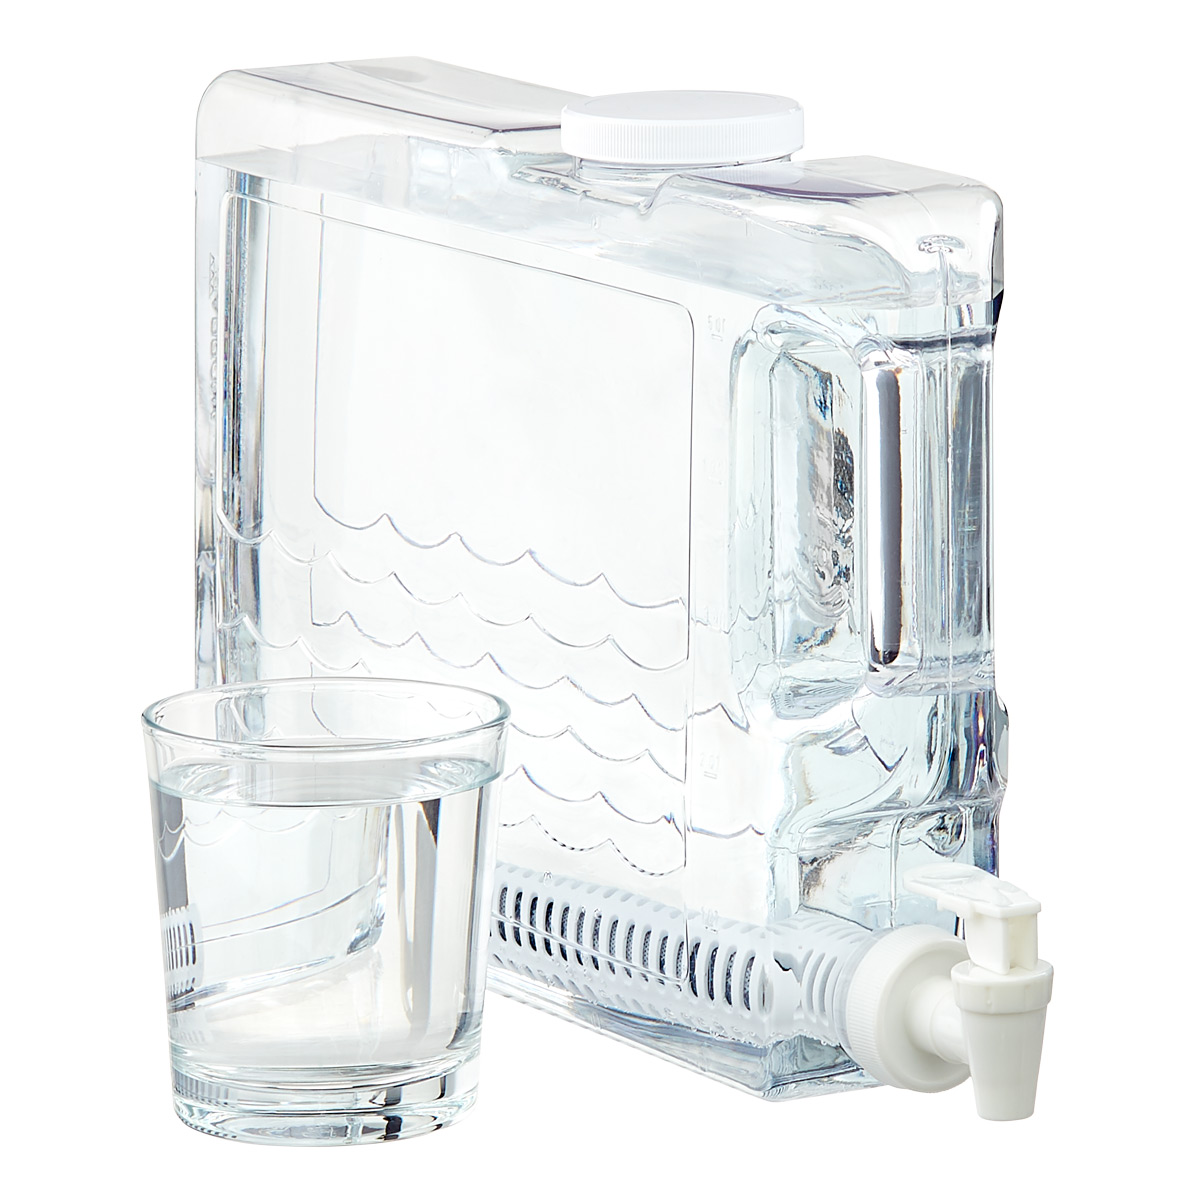 https://www.containerstore.com/catalogimages/413915/10084641_1.5_gallon_water_filter_sys.jpg